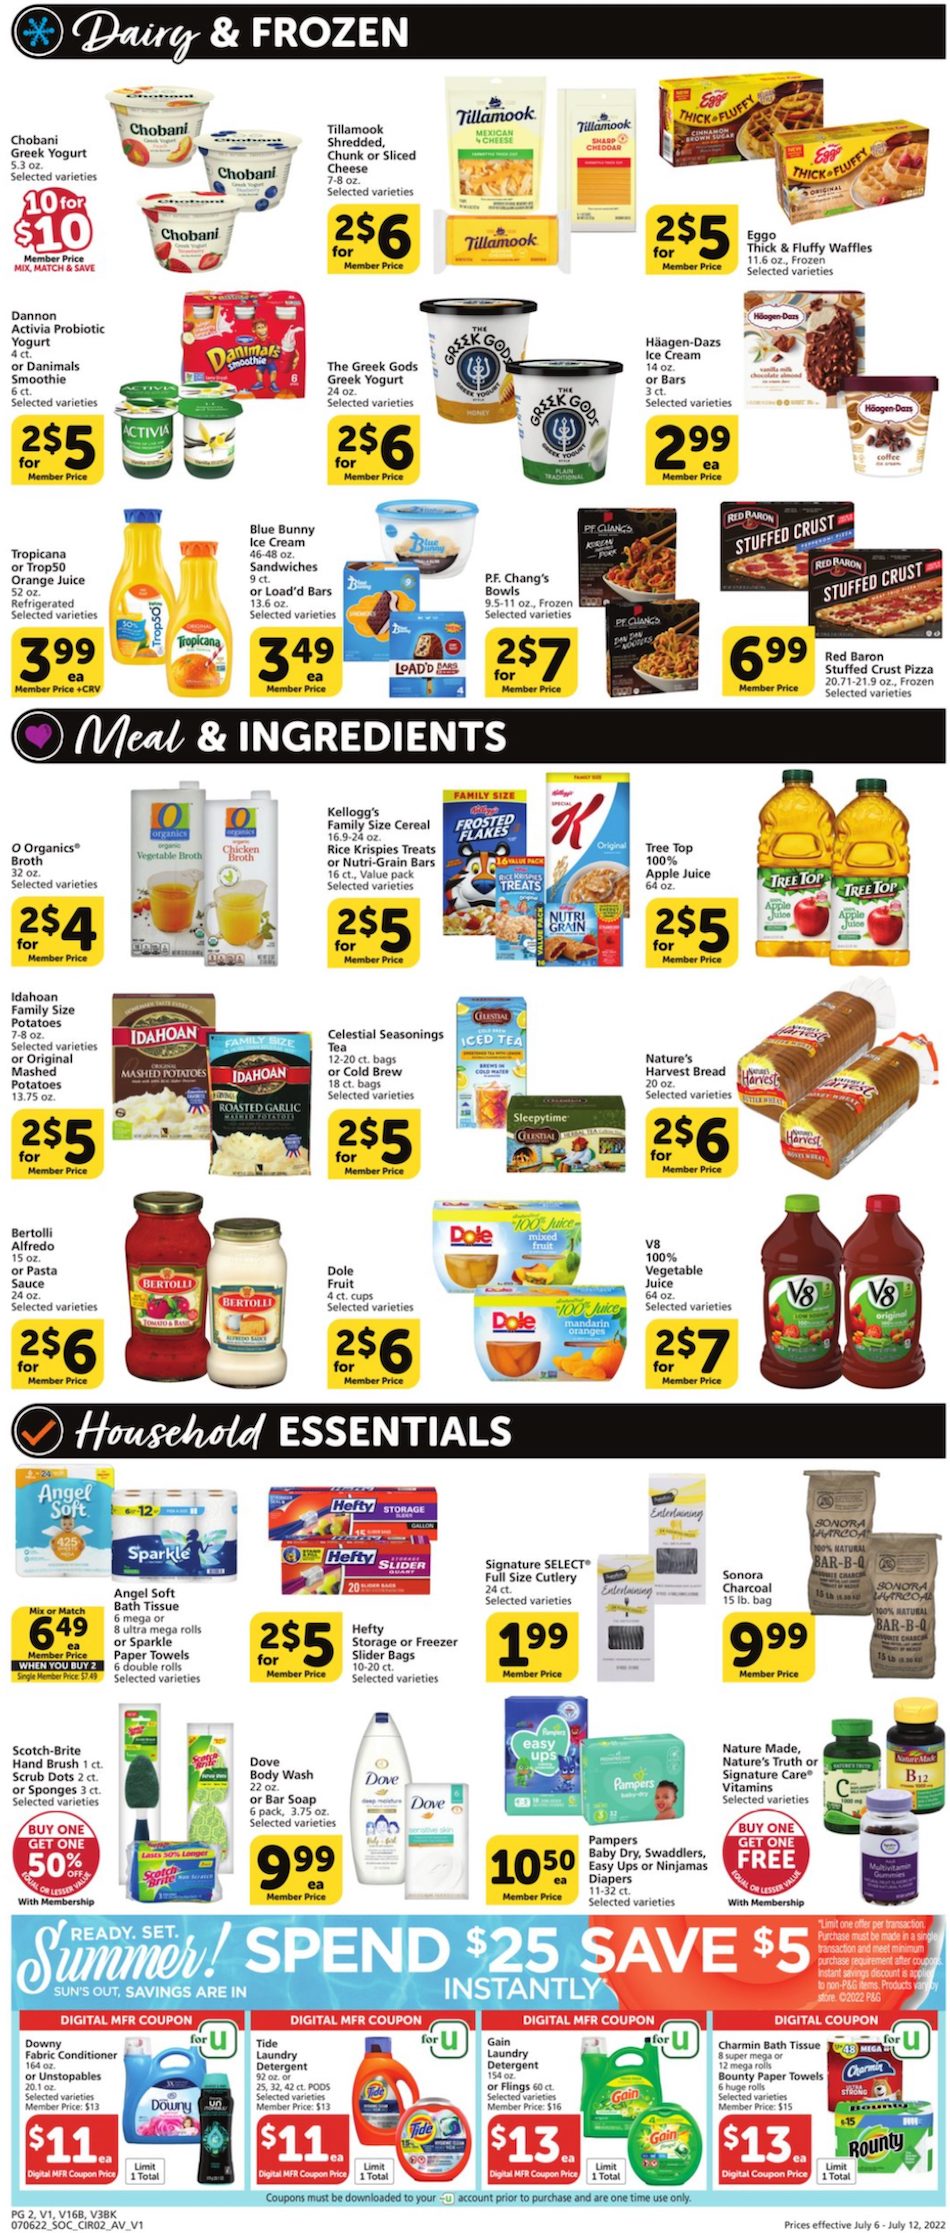 Vons Weekly Ad